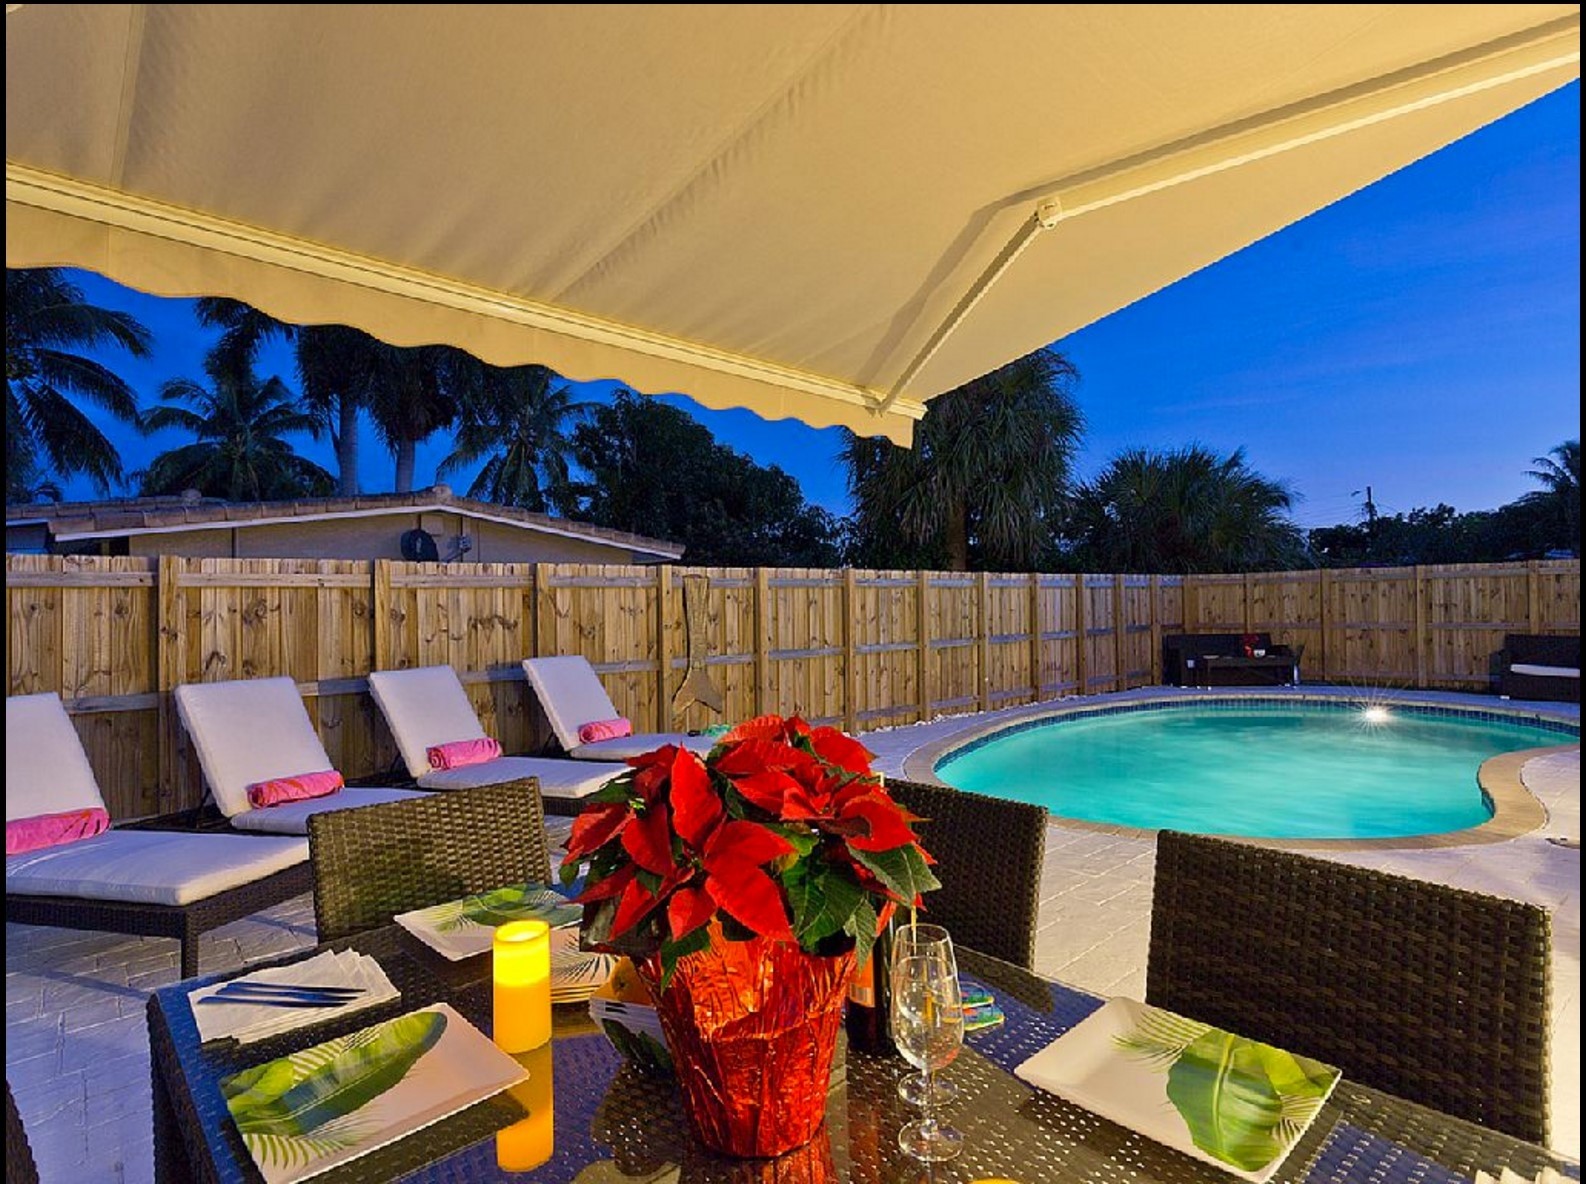 Southern Florida Vacation - Beachway Per Ankh - Our Beautiful Ranch House in Pompano Beach, Florida!